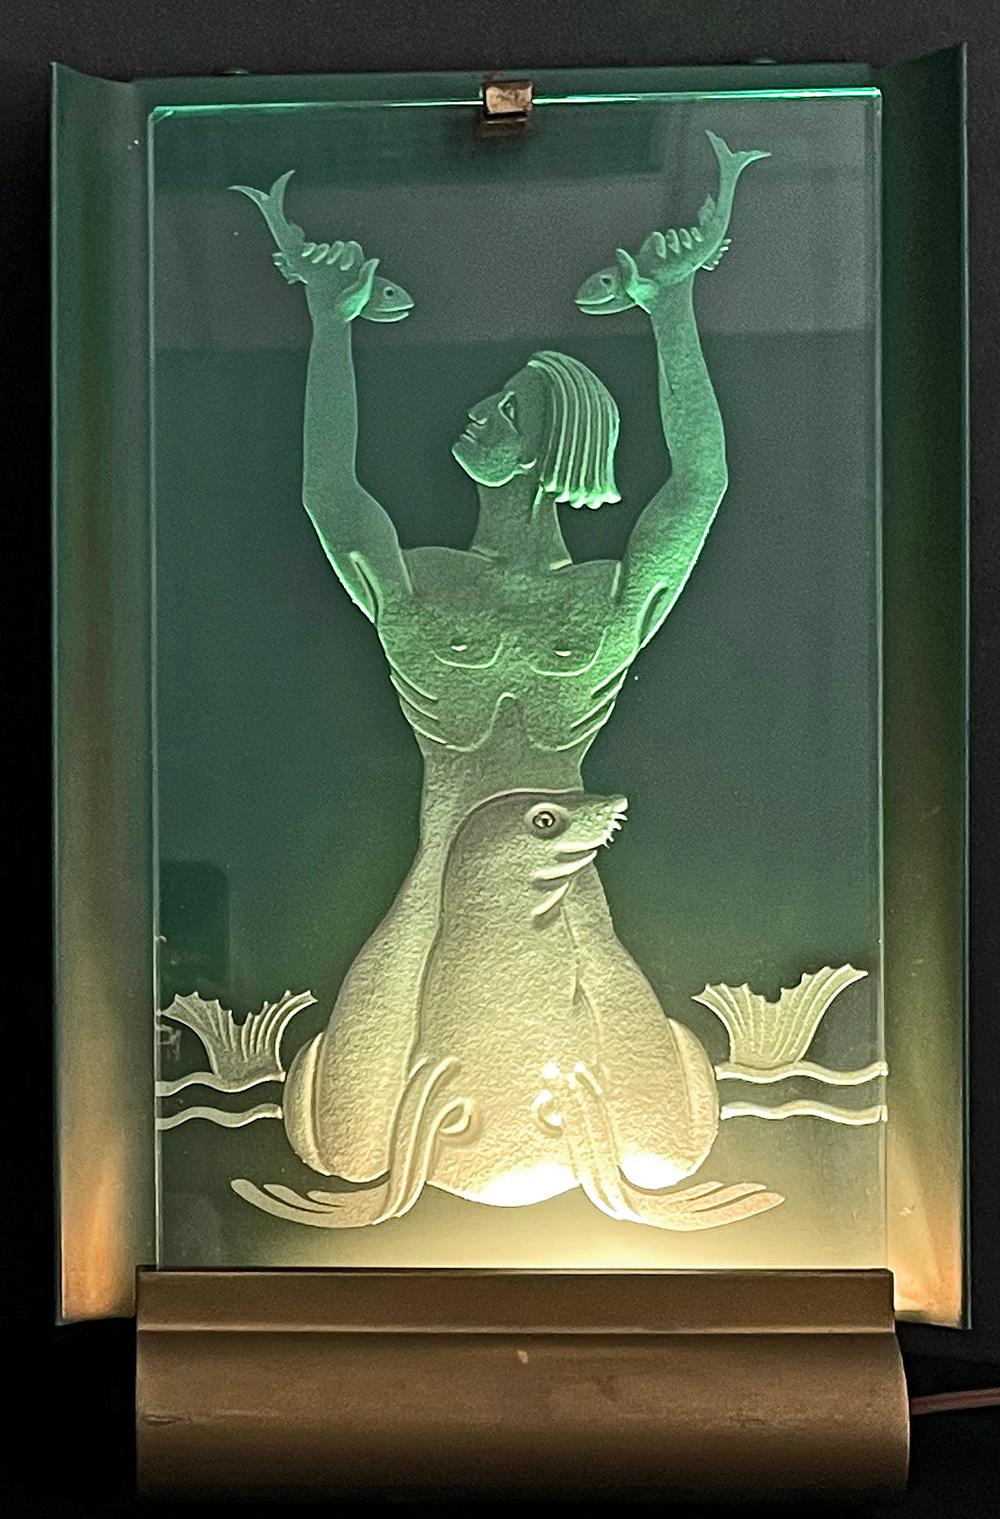 Rare and striking, this pair of Art Deco illuminated sconces depict two aquatic scenes: a merman riding a seal and holding two fish aloft; and a pair of fish twisting in the Art Deco currents. Crafted in Sweden, where underwater themes were common